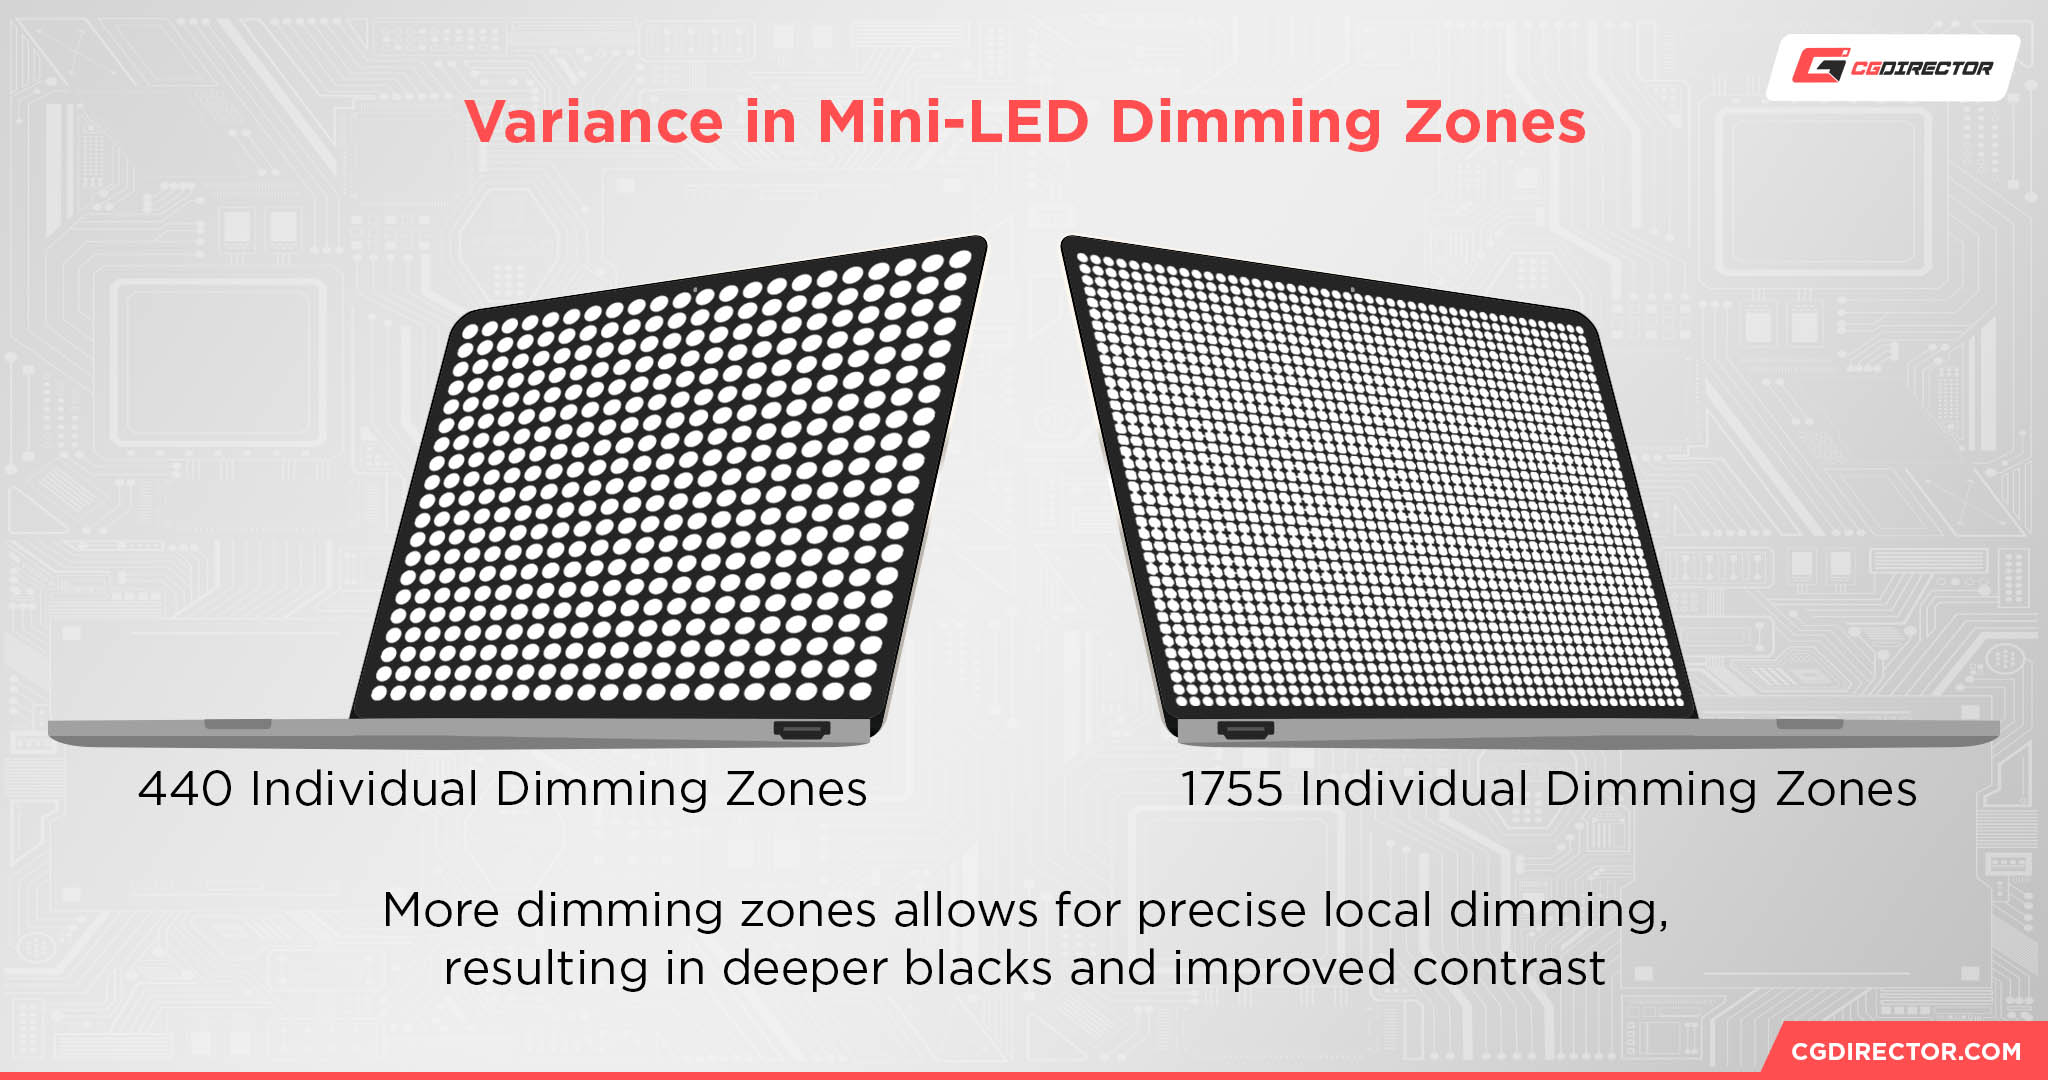 Variance in Mini-LED Dimming Zones